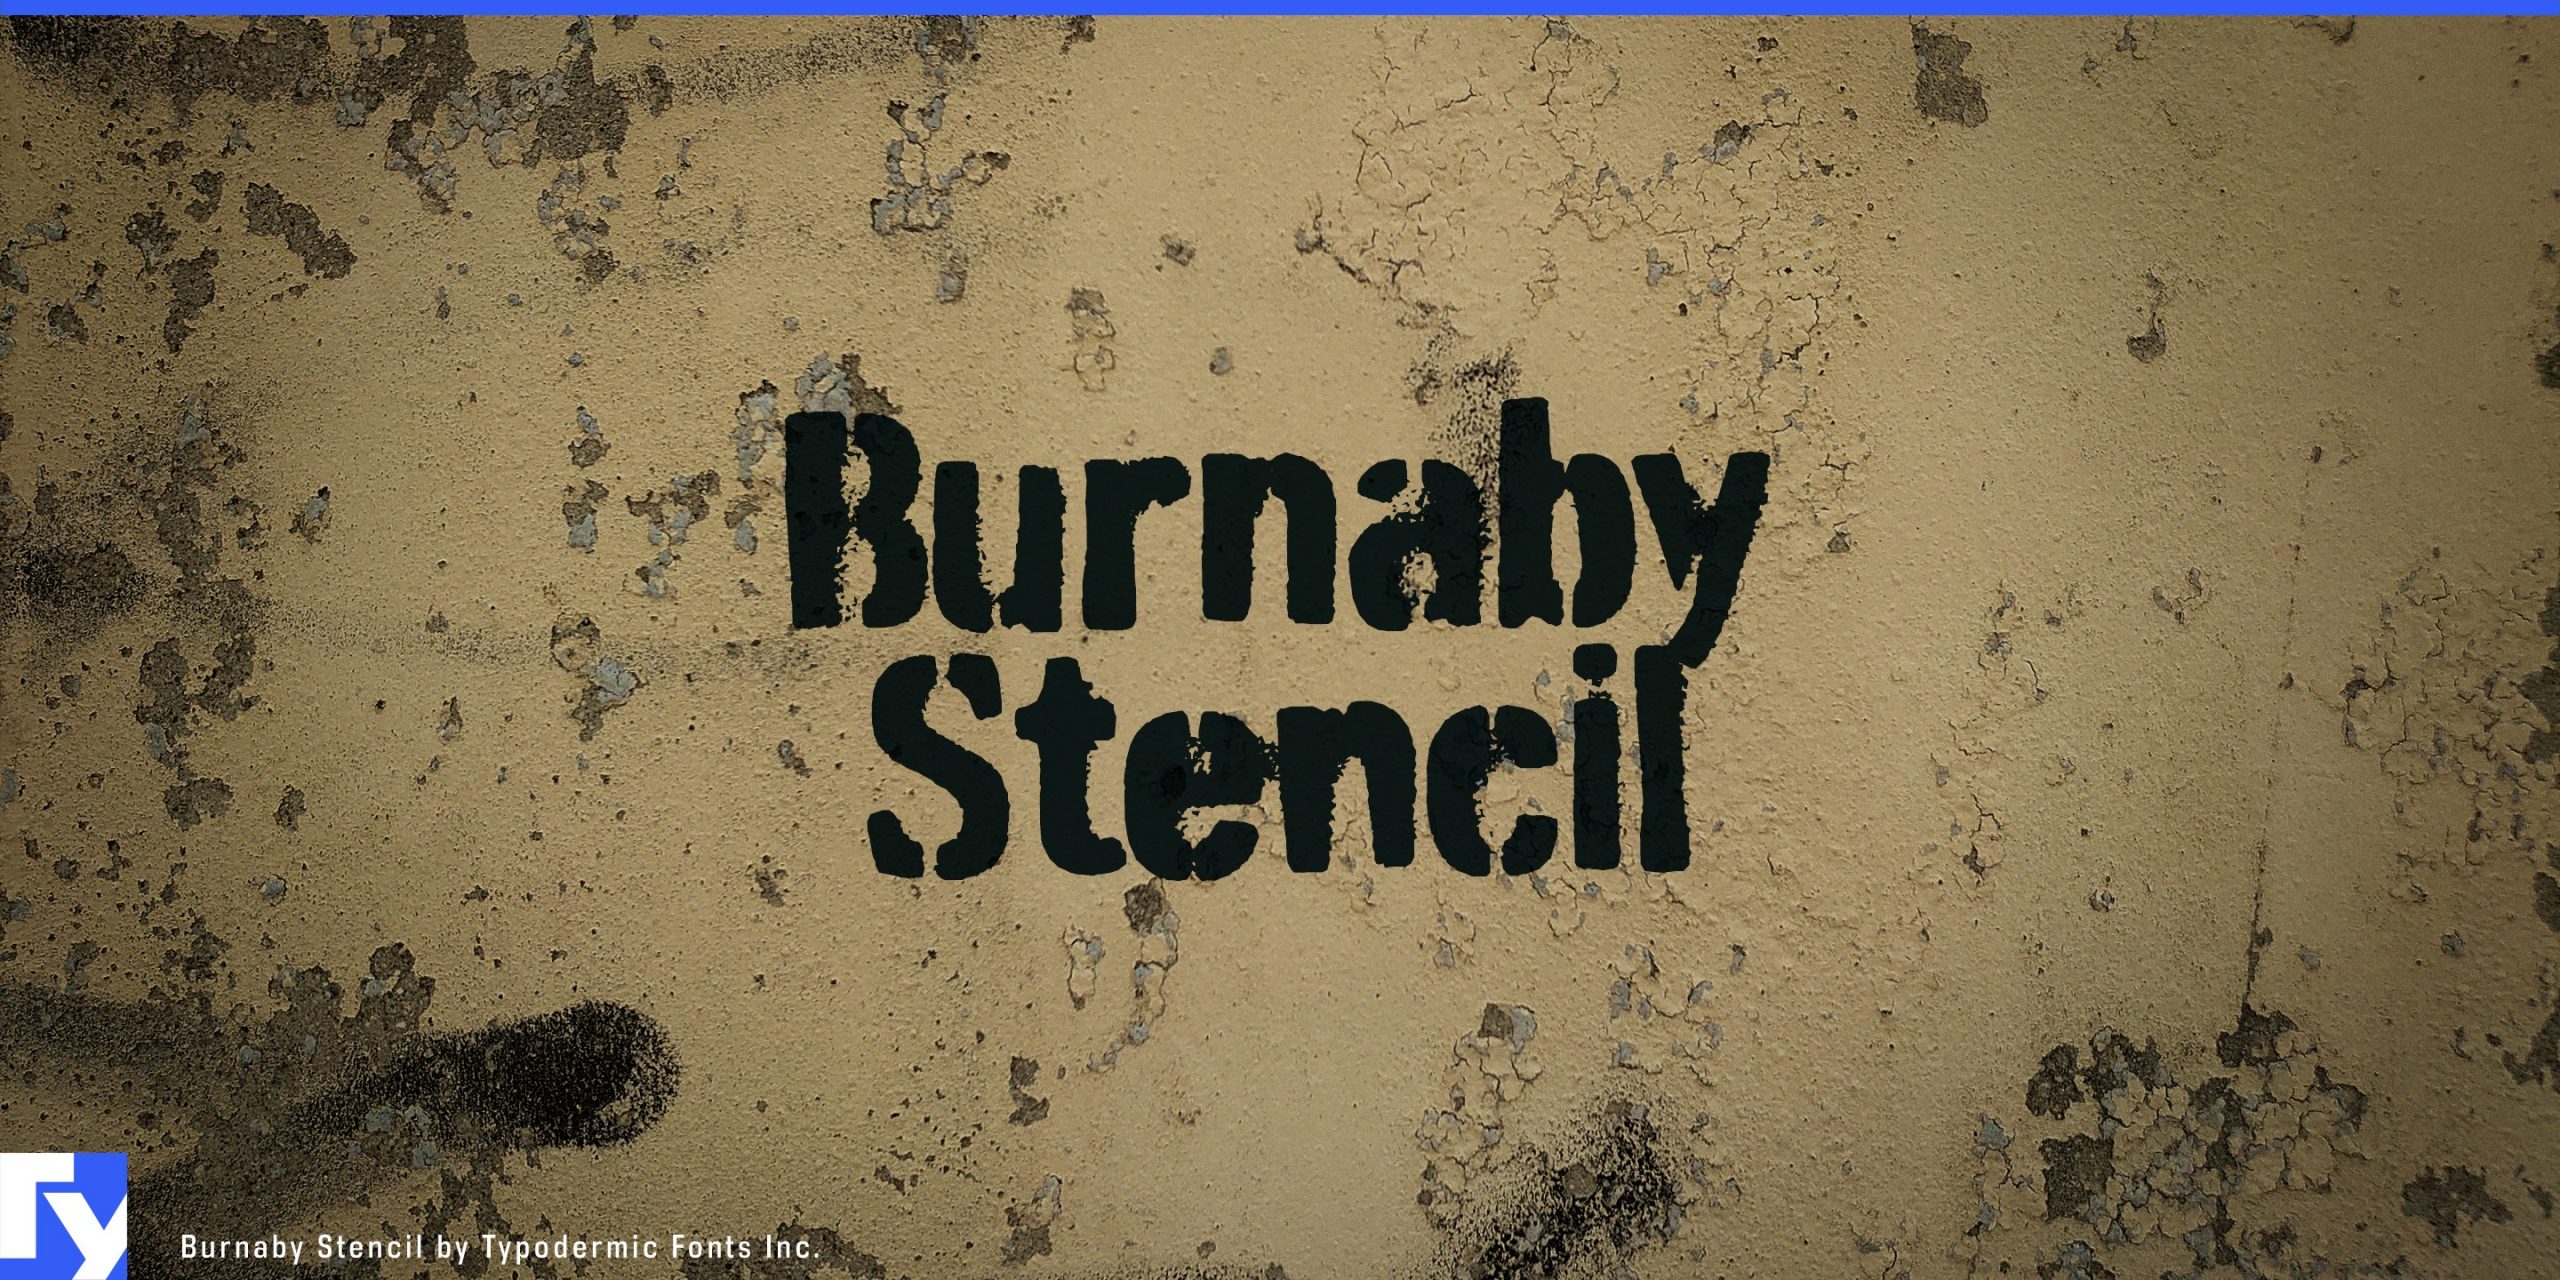 Spray-Painted Edginess: Burnaby Stencil Typeface Adds Urban Flair